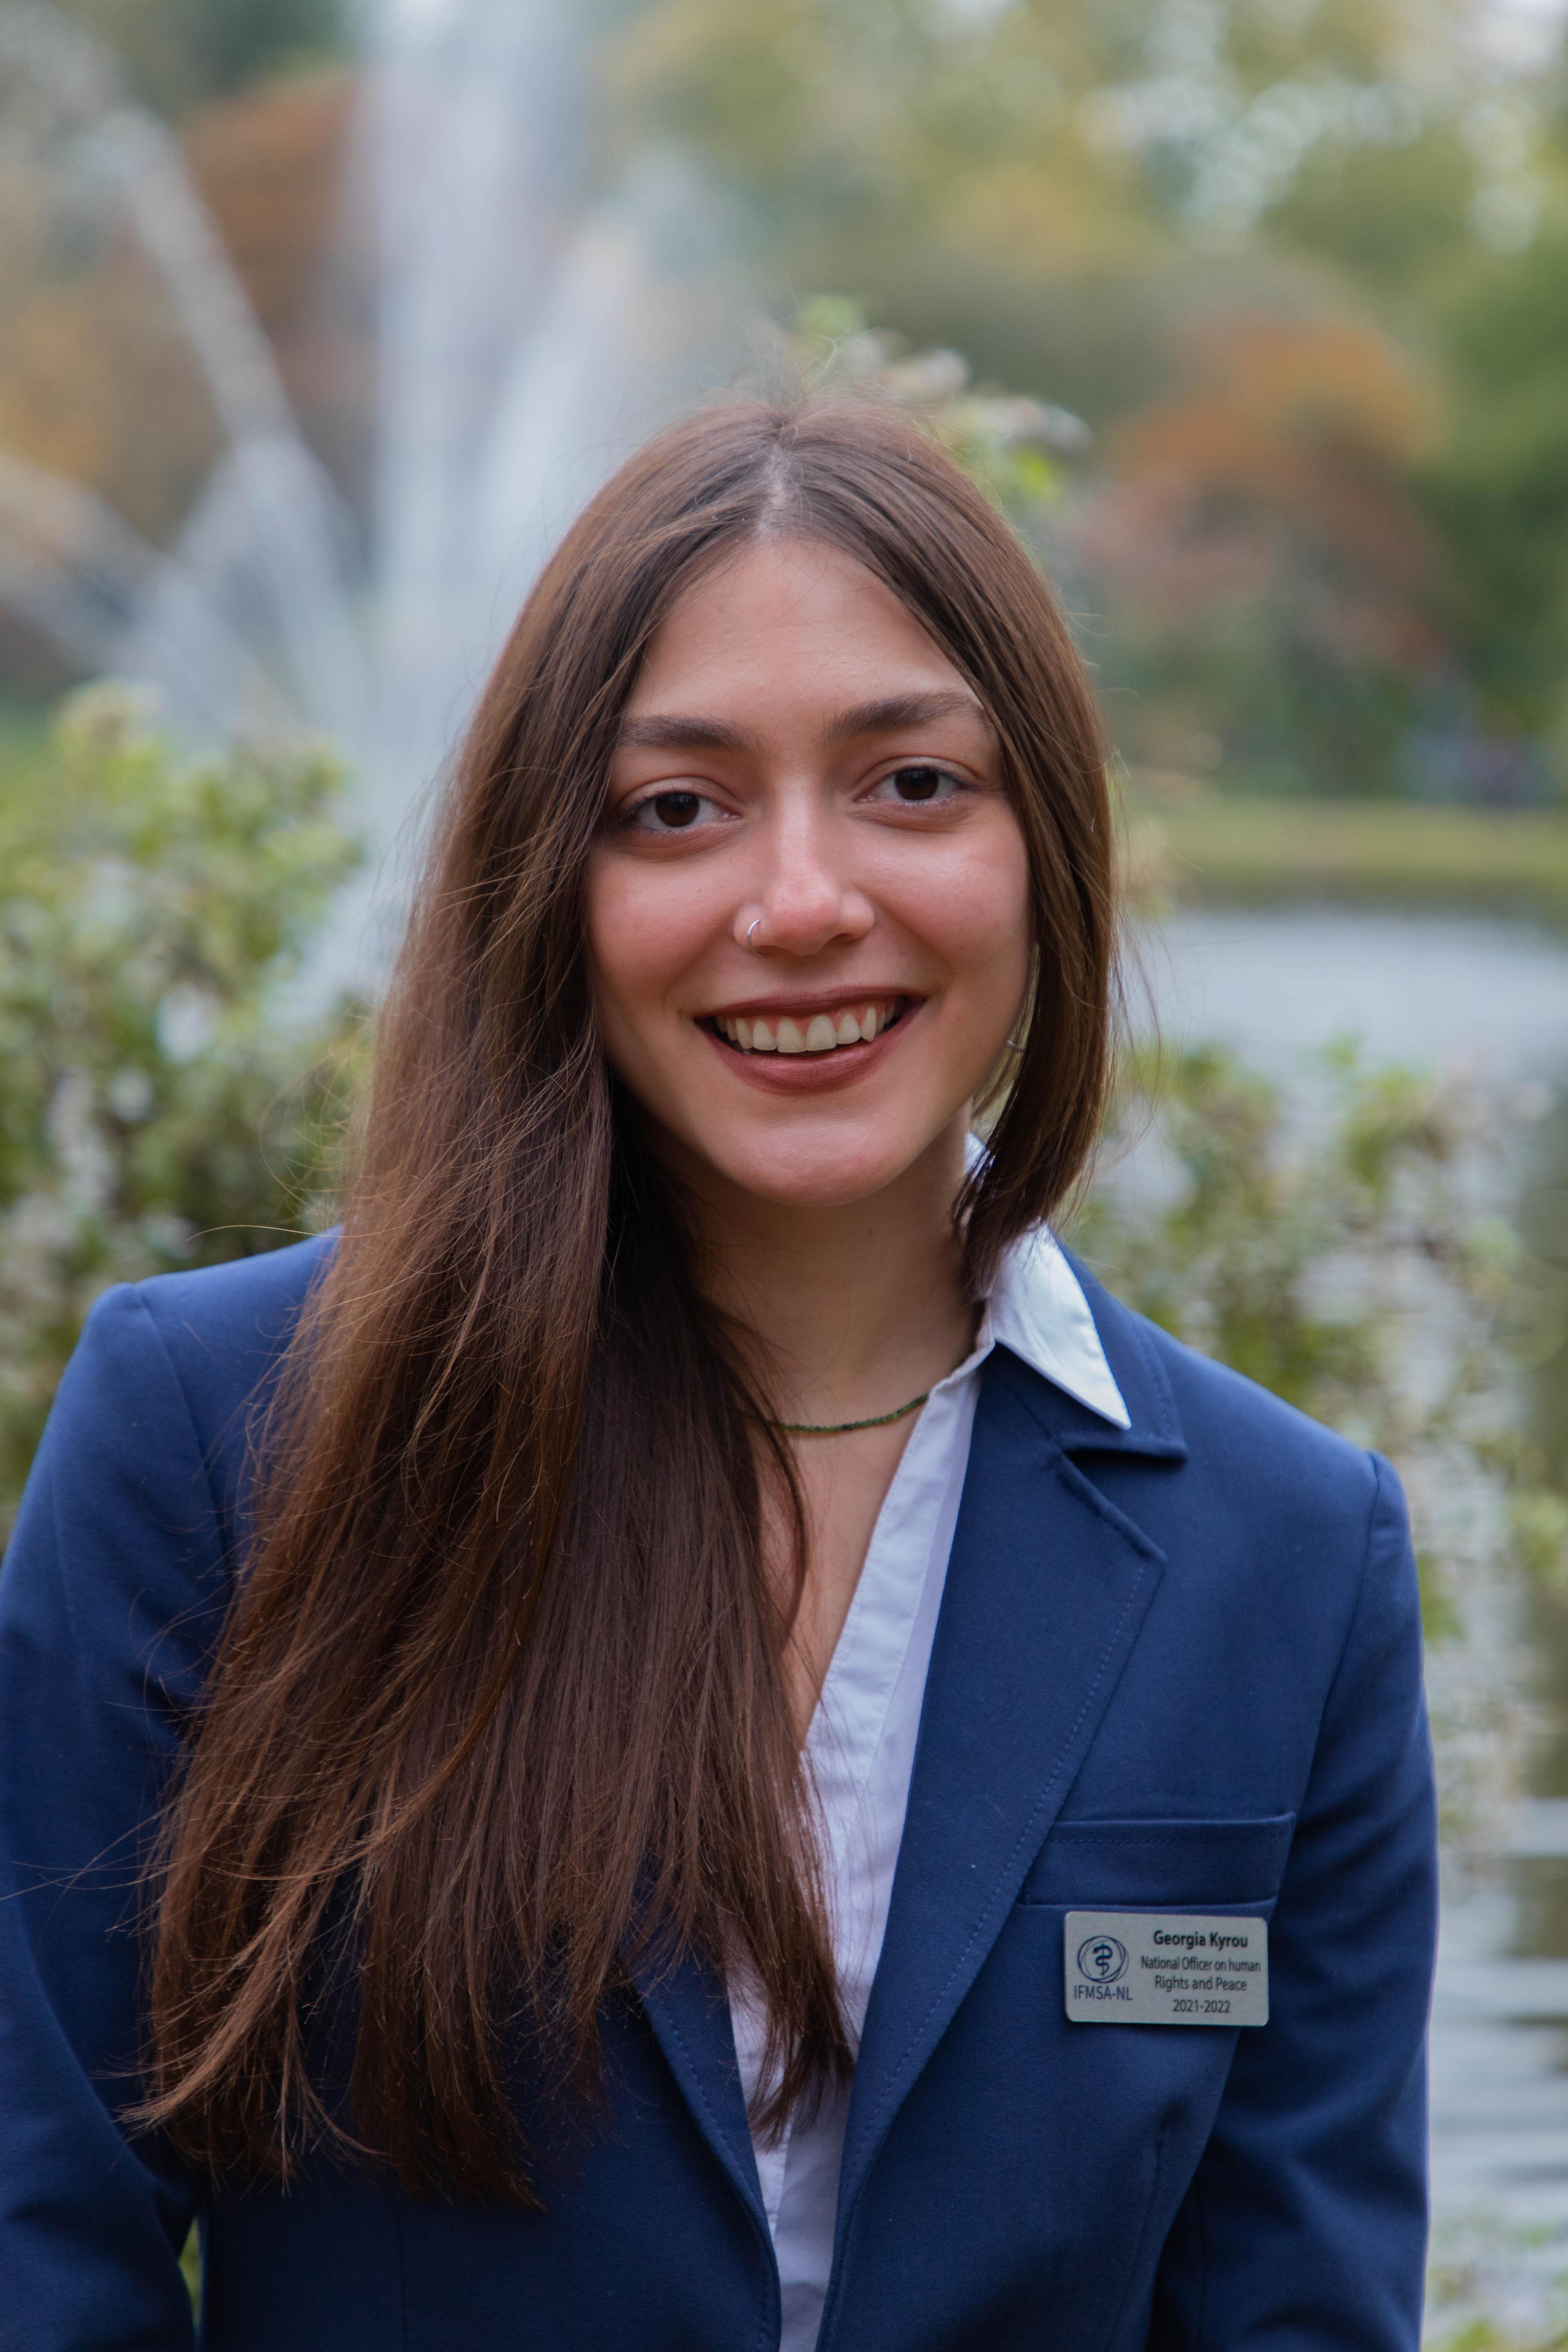 Georgia Kyrou, National Officer on human Rights and Peace